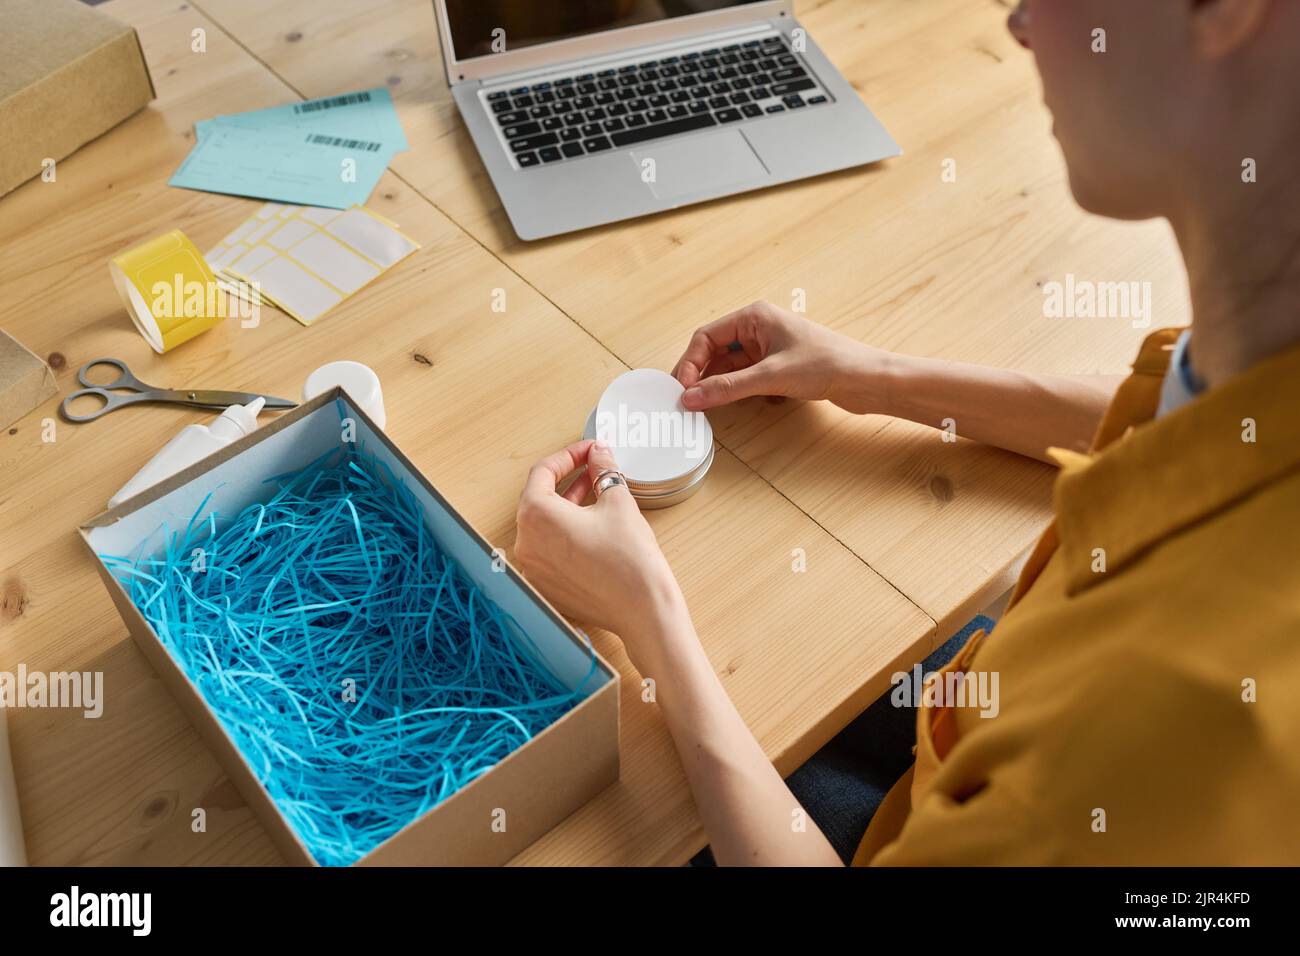 Close-up of woman working with online orders at table to pack parcels for delivery Stock Photo